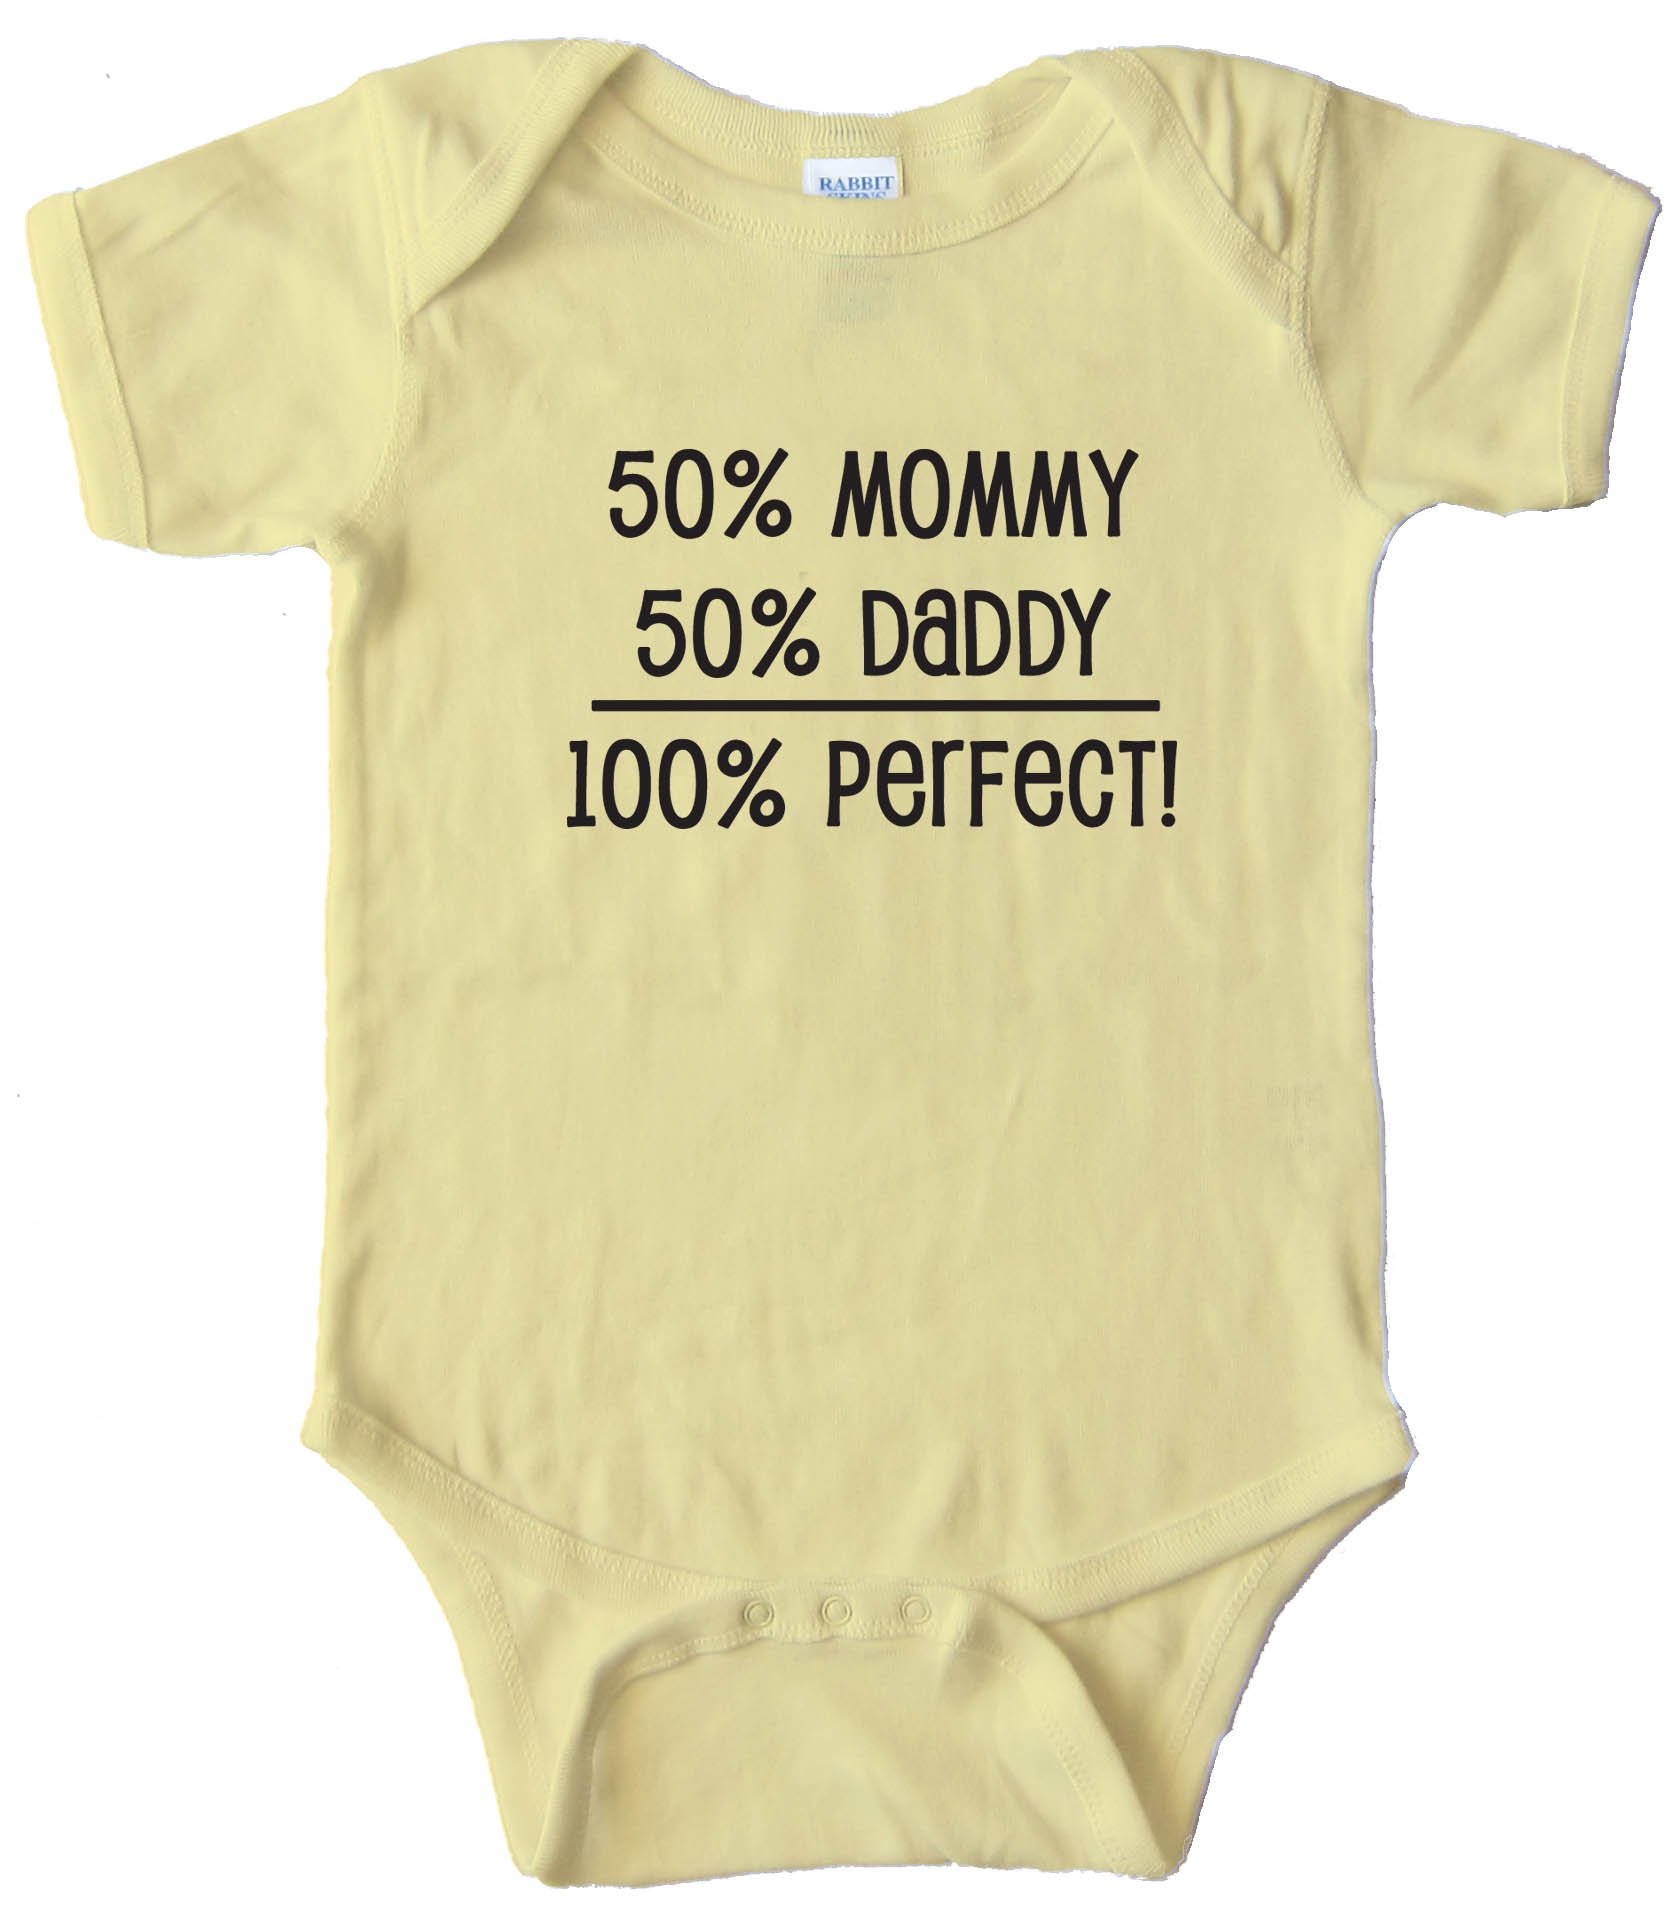 50% Mommy 50% Daddy - 100% Perfect - Baby Bodysuit